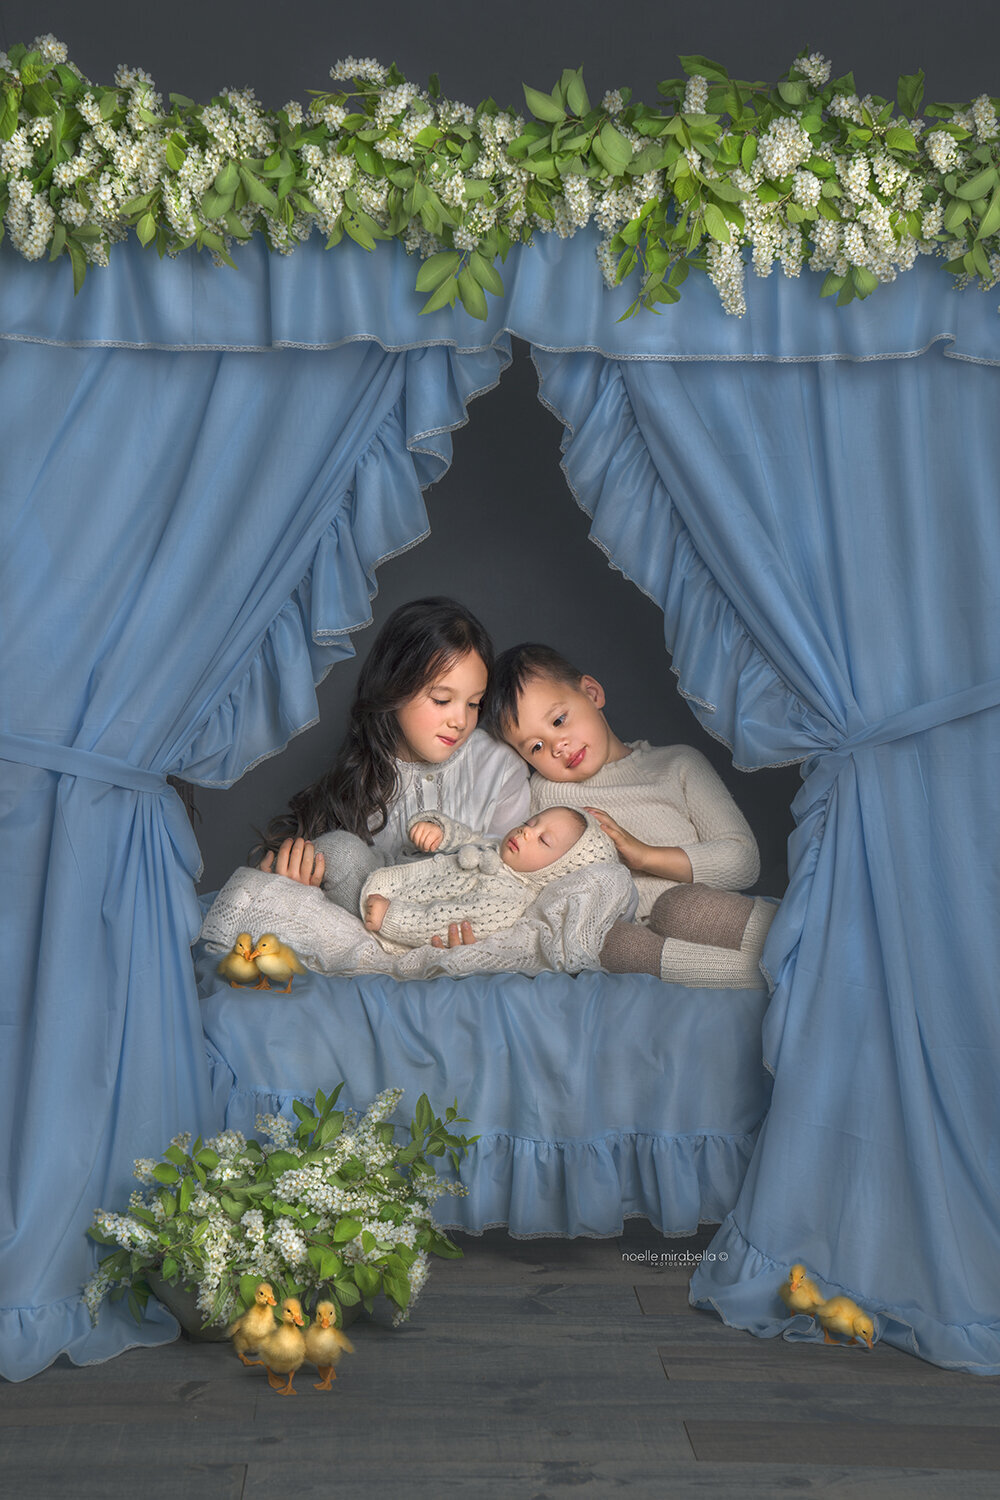 Three children snuggled up under blue canopy bed. Baby ducklings playing on the floor.  Vintage style portrait of children.